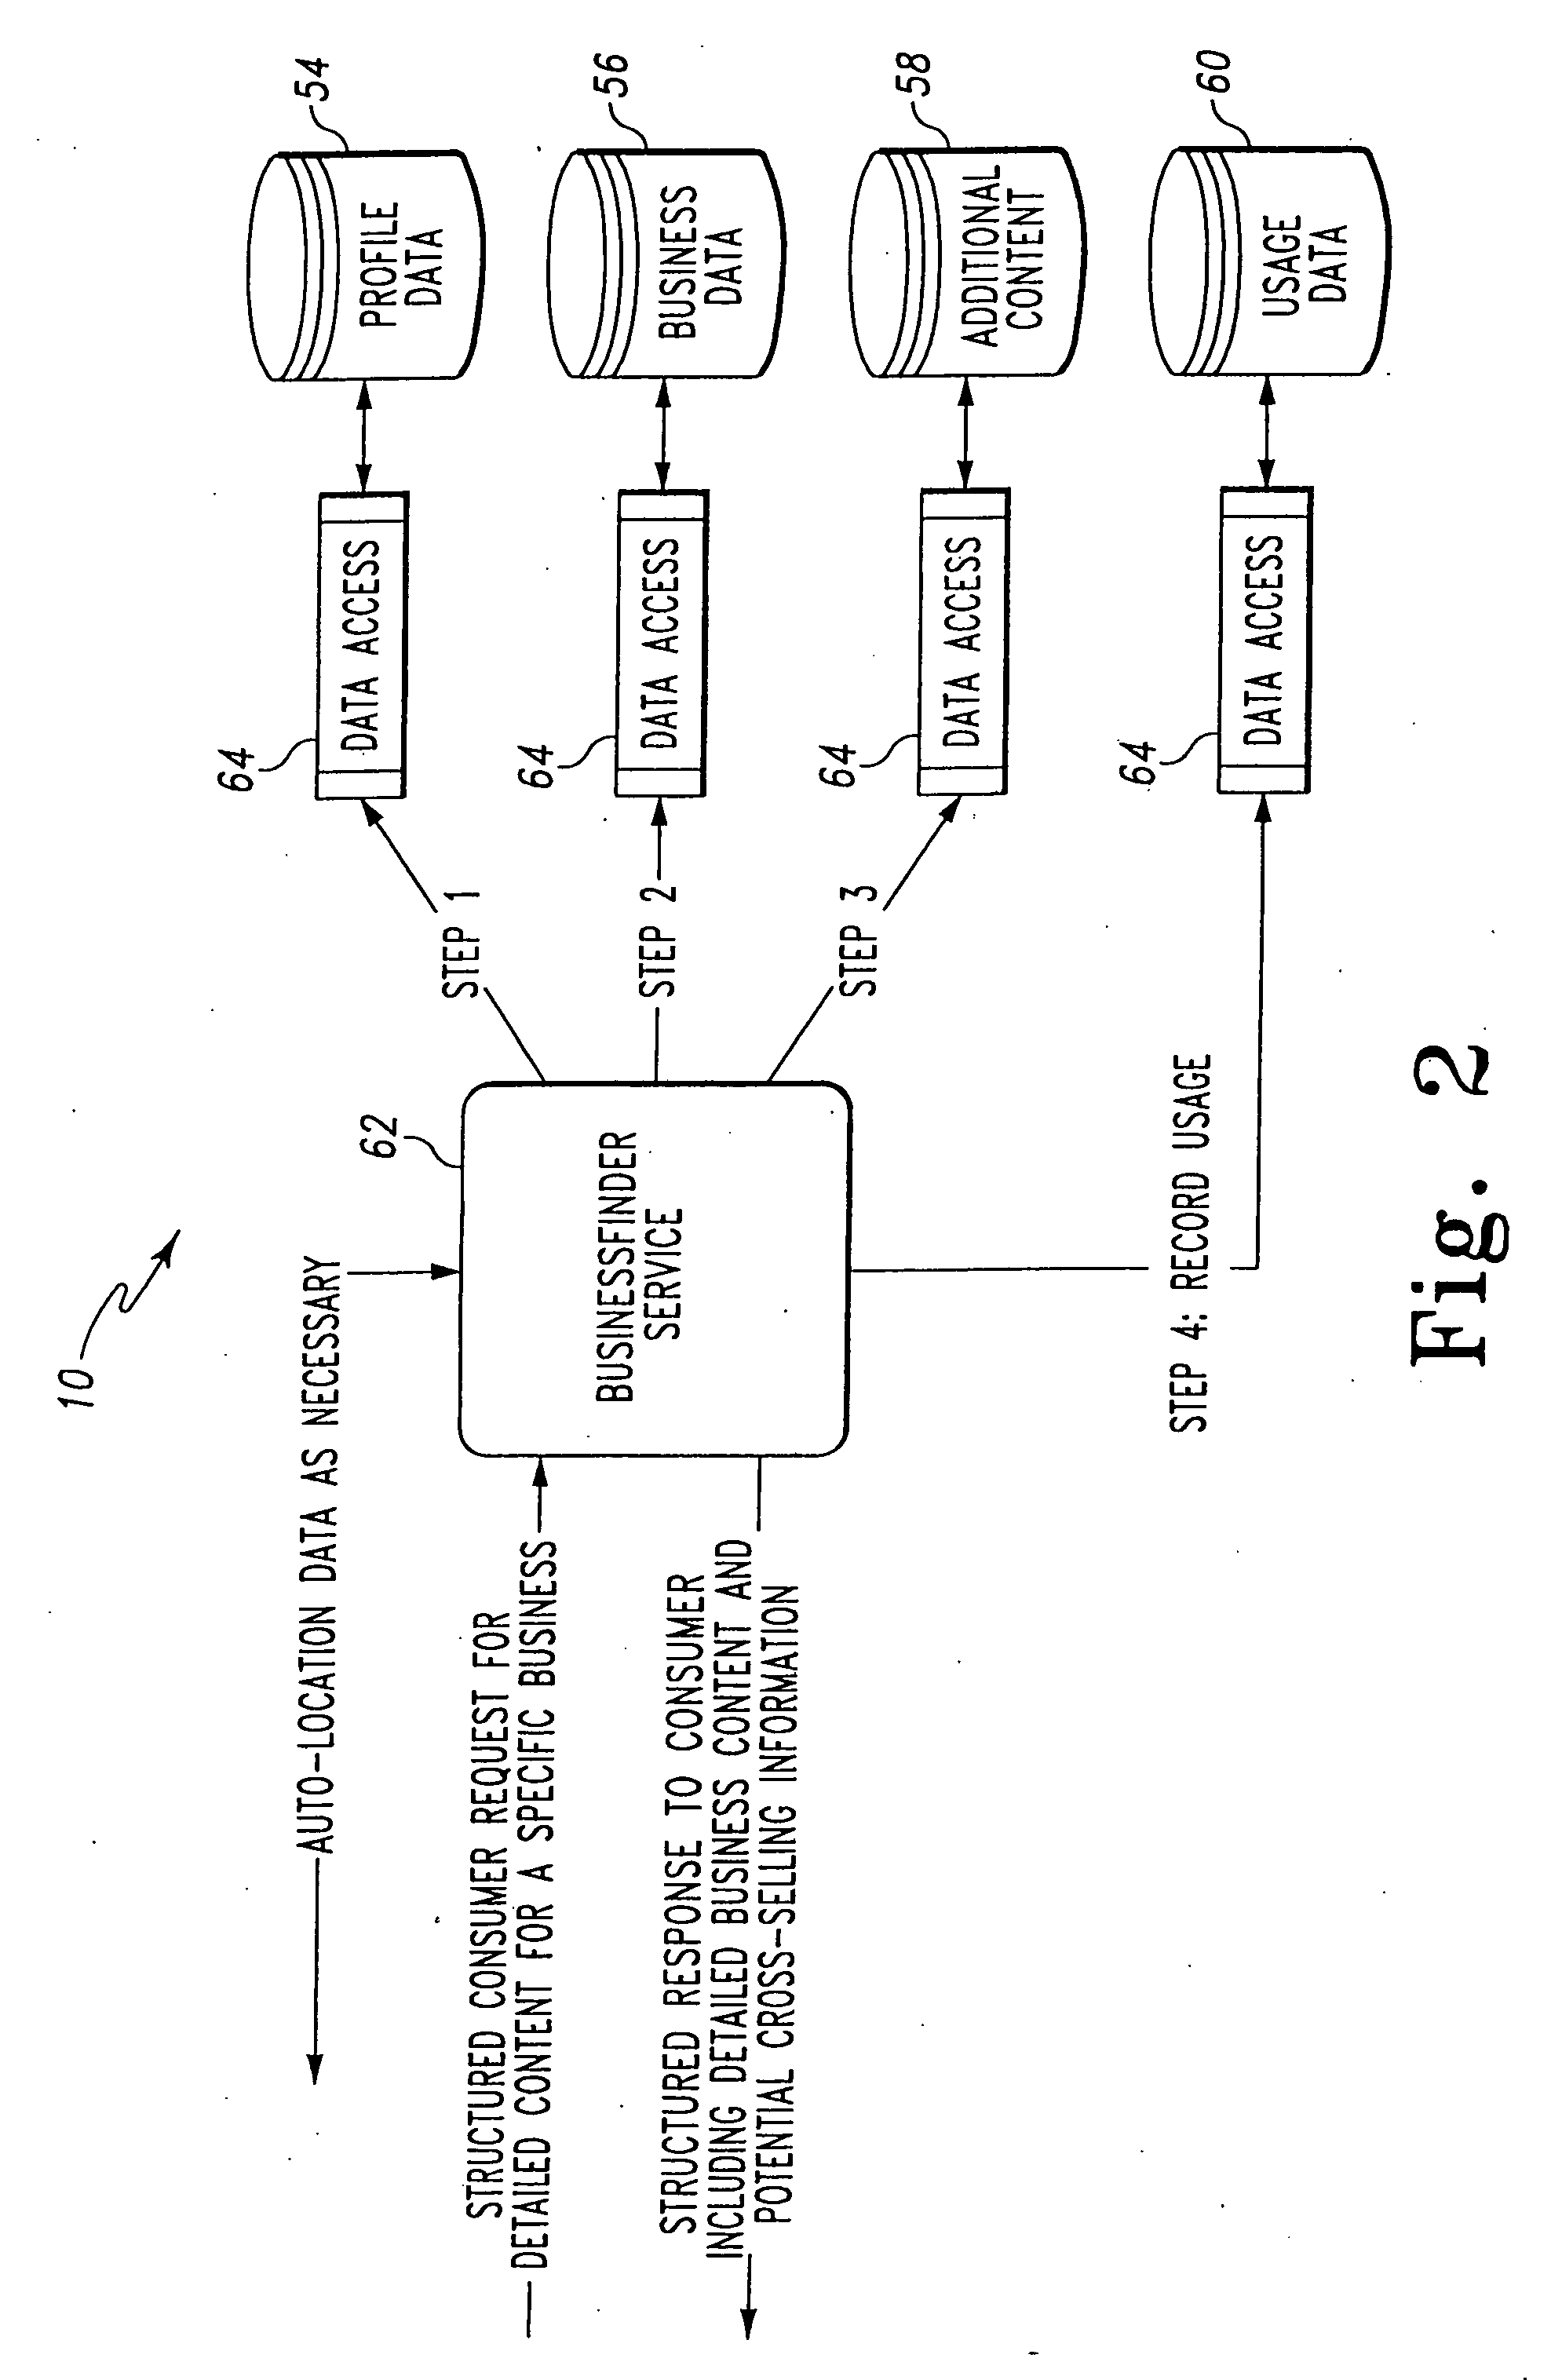 Method for passive mining of usage information in a location-based services system